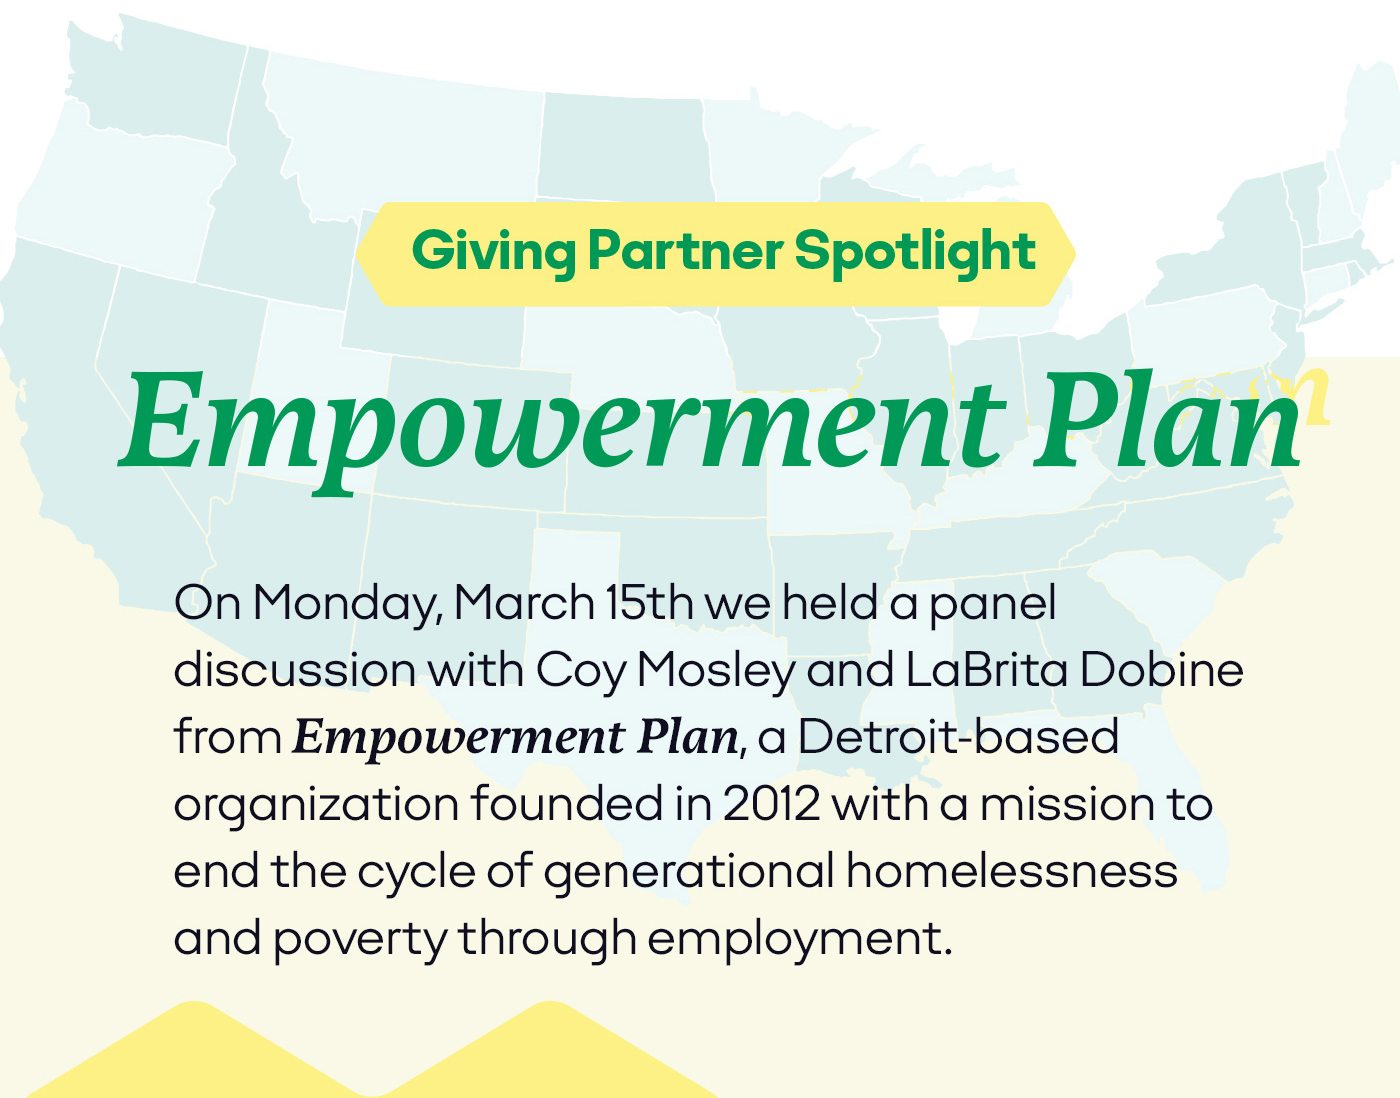 On Monday, March 15th we held a panel discussion with Coy Mosley and LaBrita Dobine from Empowerment Plan, a Detroit based organization founded in 2012 with a mission to end the cycle of generational homelessness and poverty through employment.